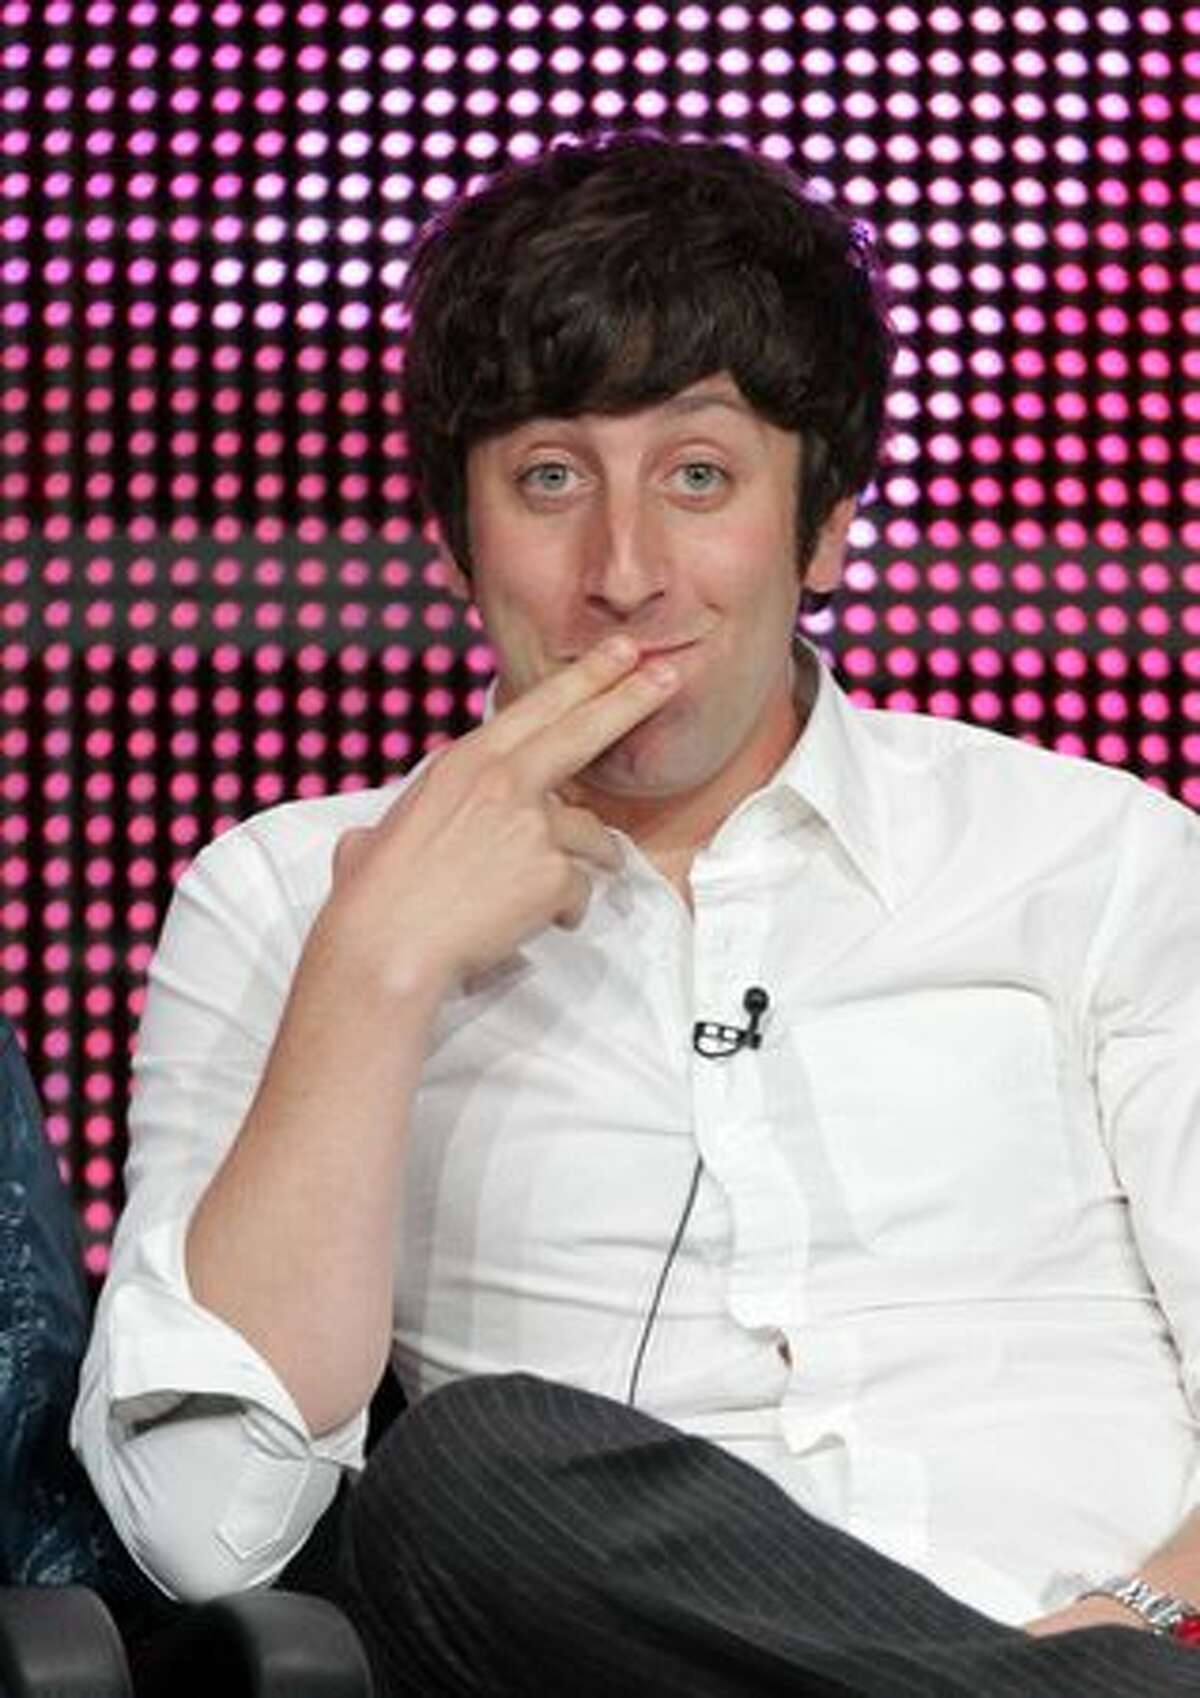 Actor Simon Helberg speaks at "The Big Bang Theory" panel during 2010 Summer TCA Tour Day 1 at the Beverly Hilton Hotel in Beverly Hills, California.